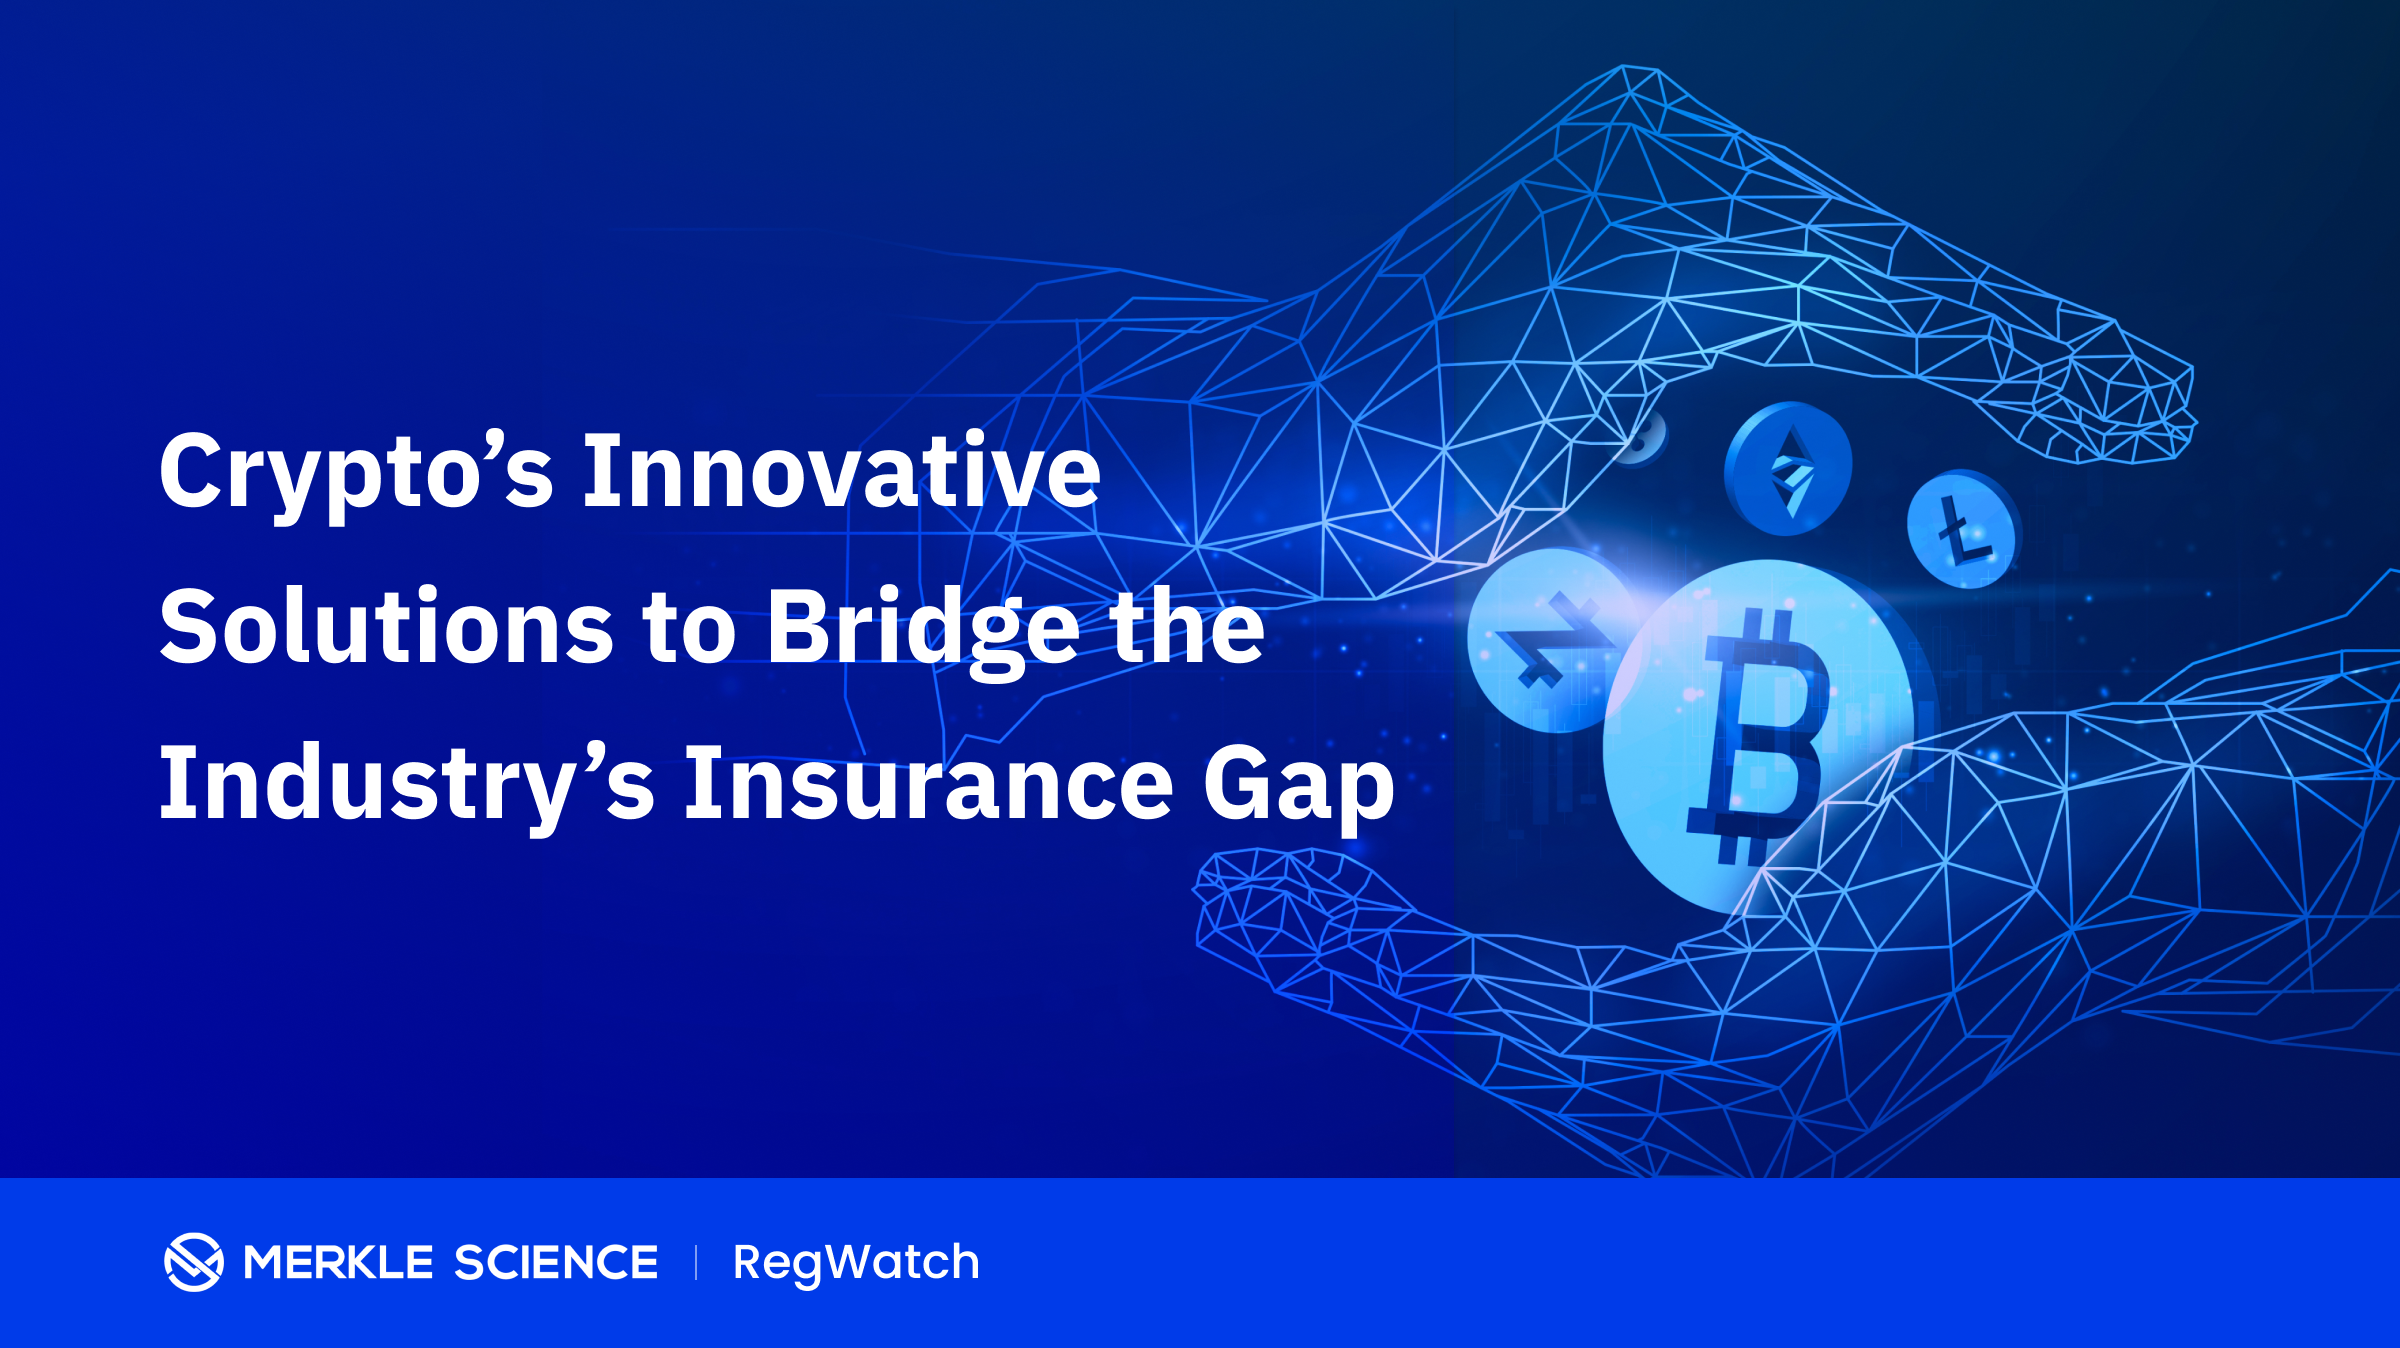 How is the Crypto Industry Trying to Fill the Gap Created by Lack of Third Party Insurance?